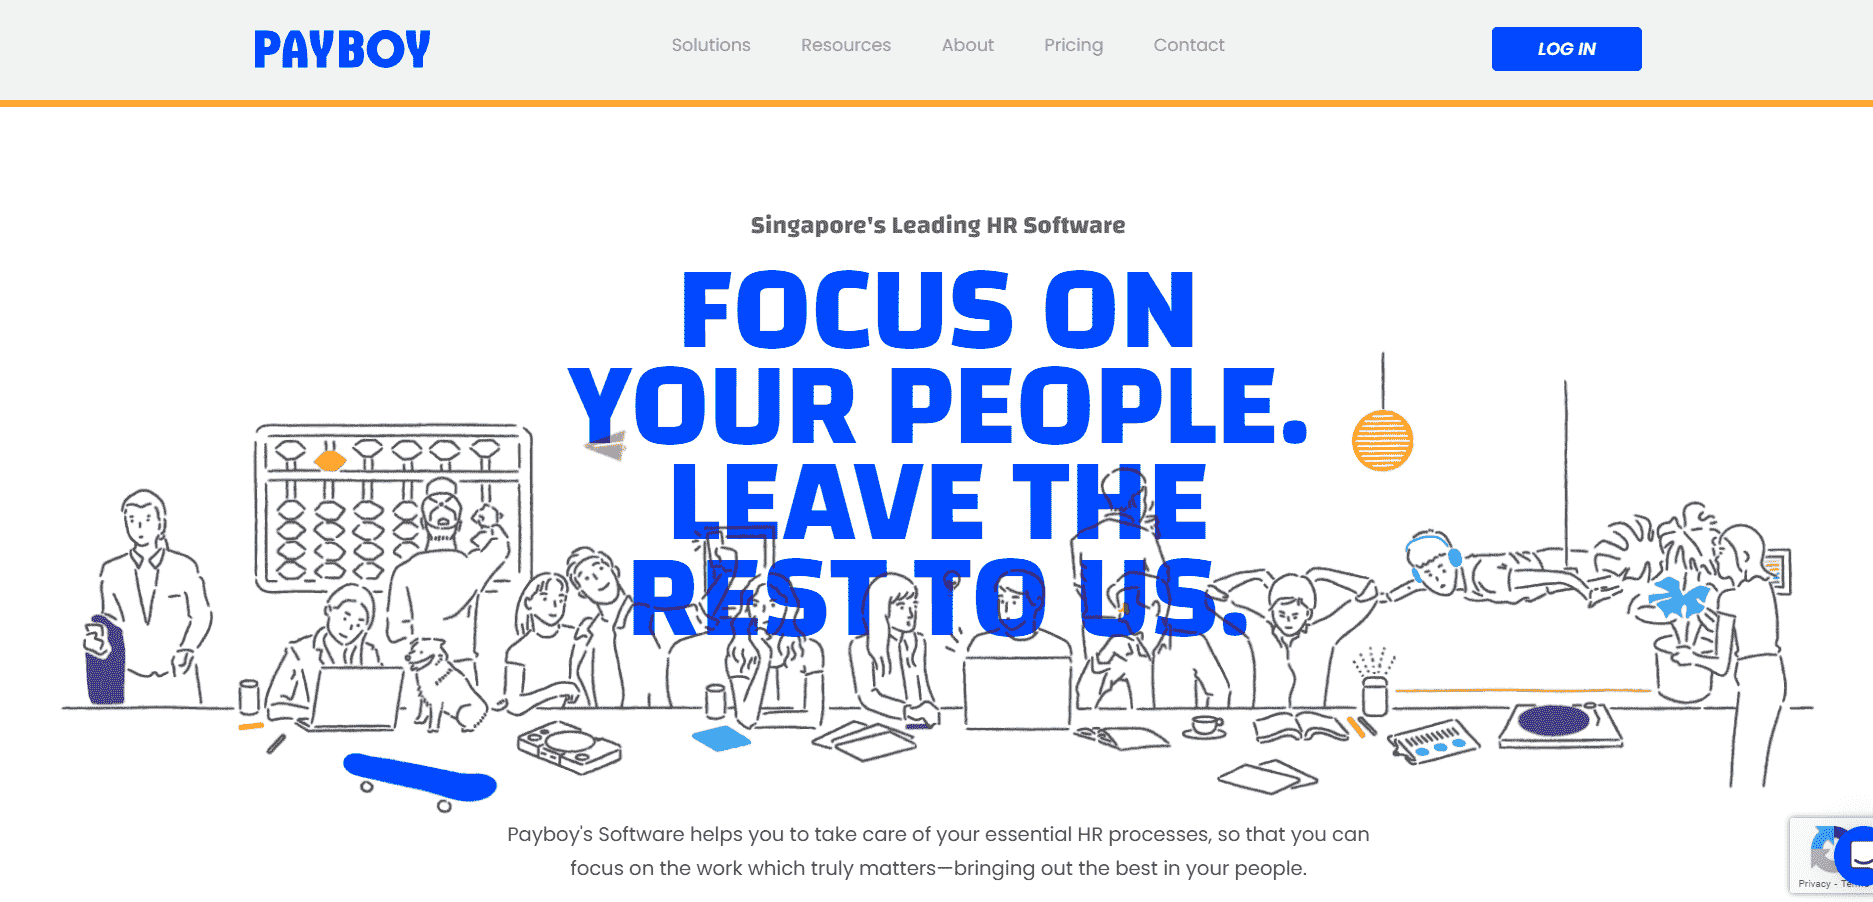 Homepage of Payboy, mentioning 'Focus on your people. Leave the rest to us'